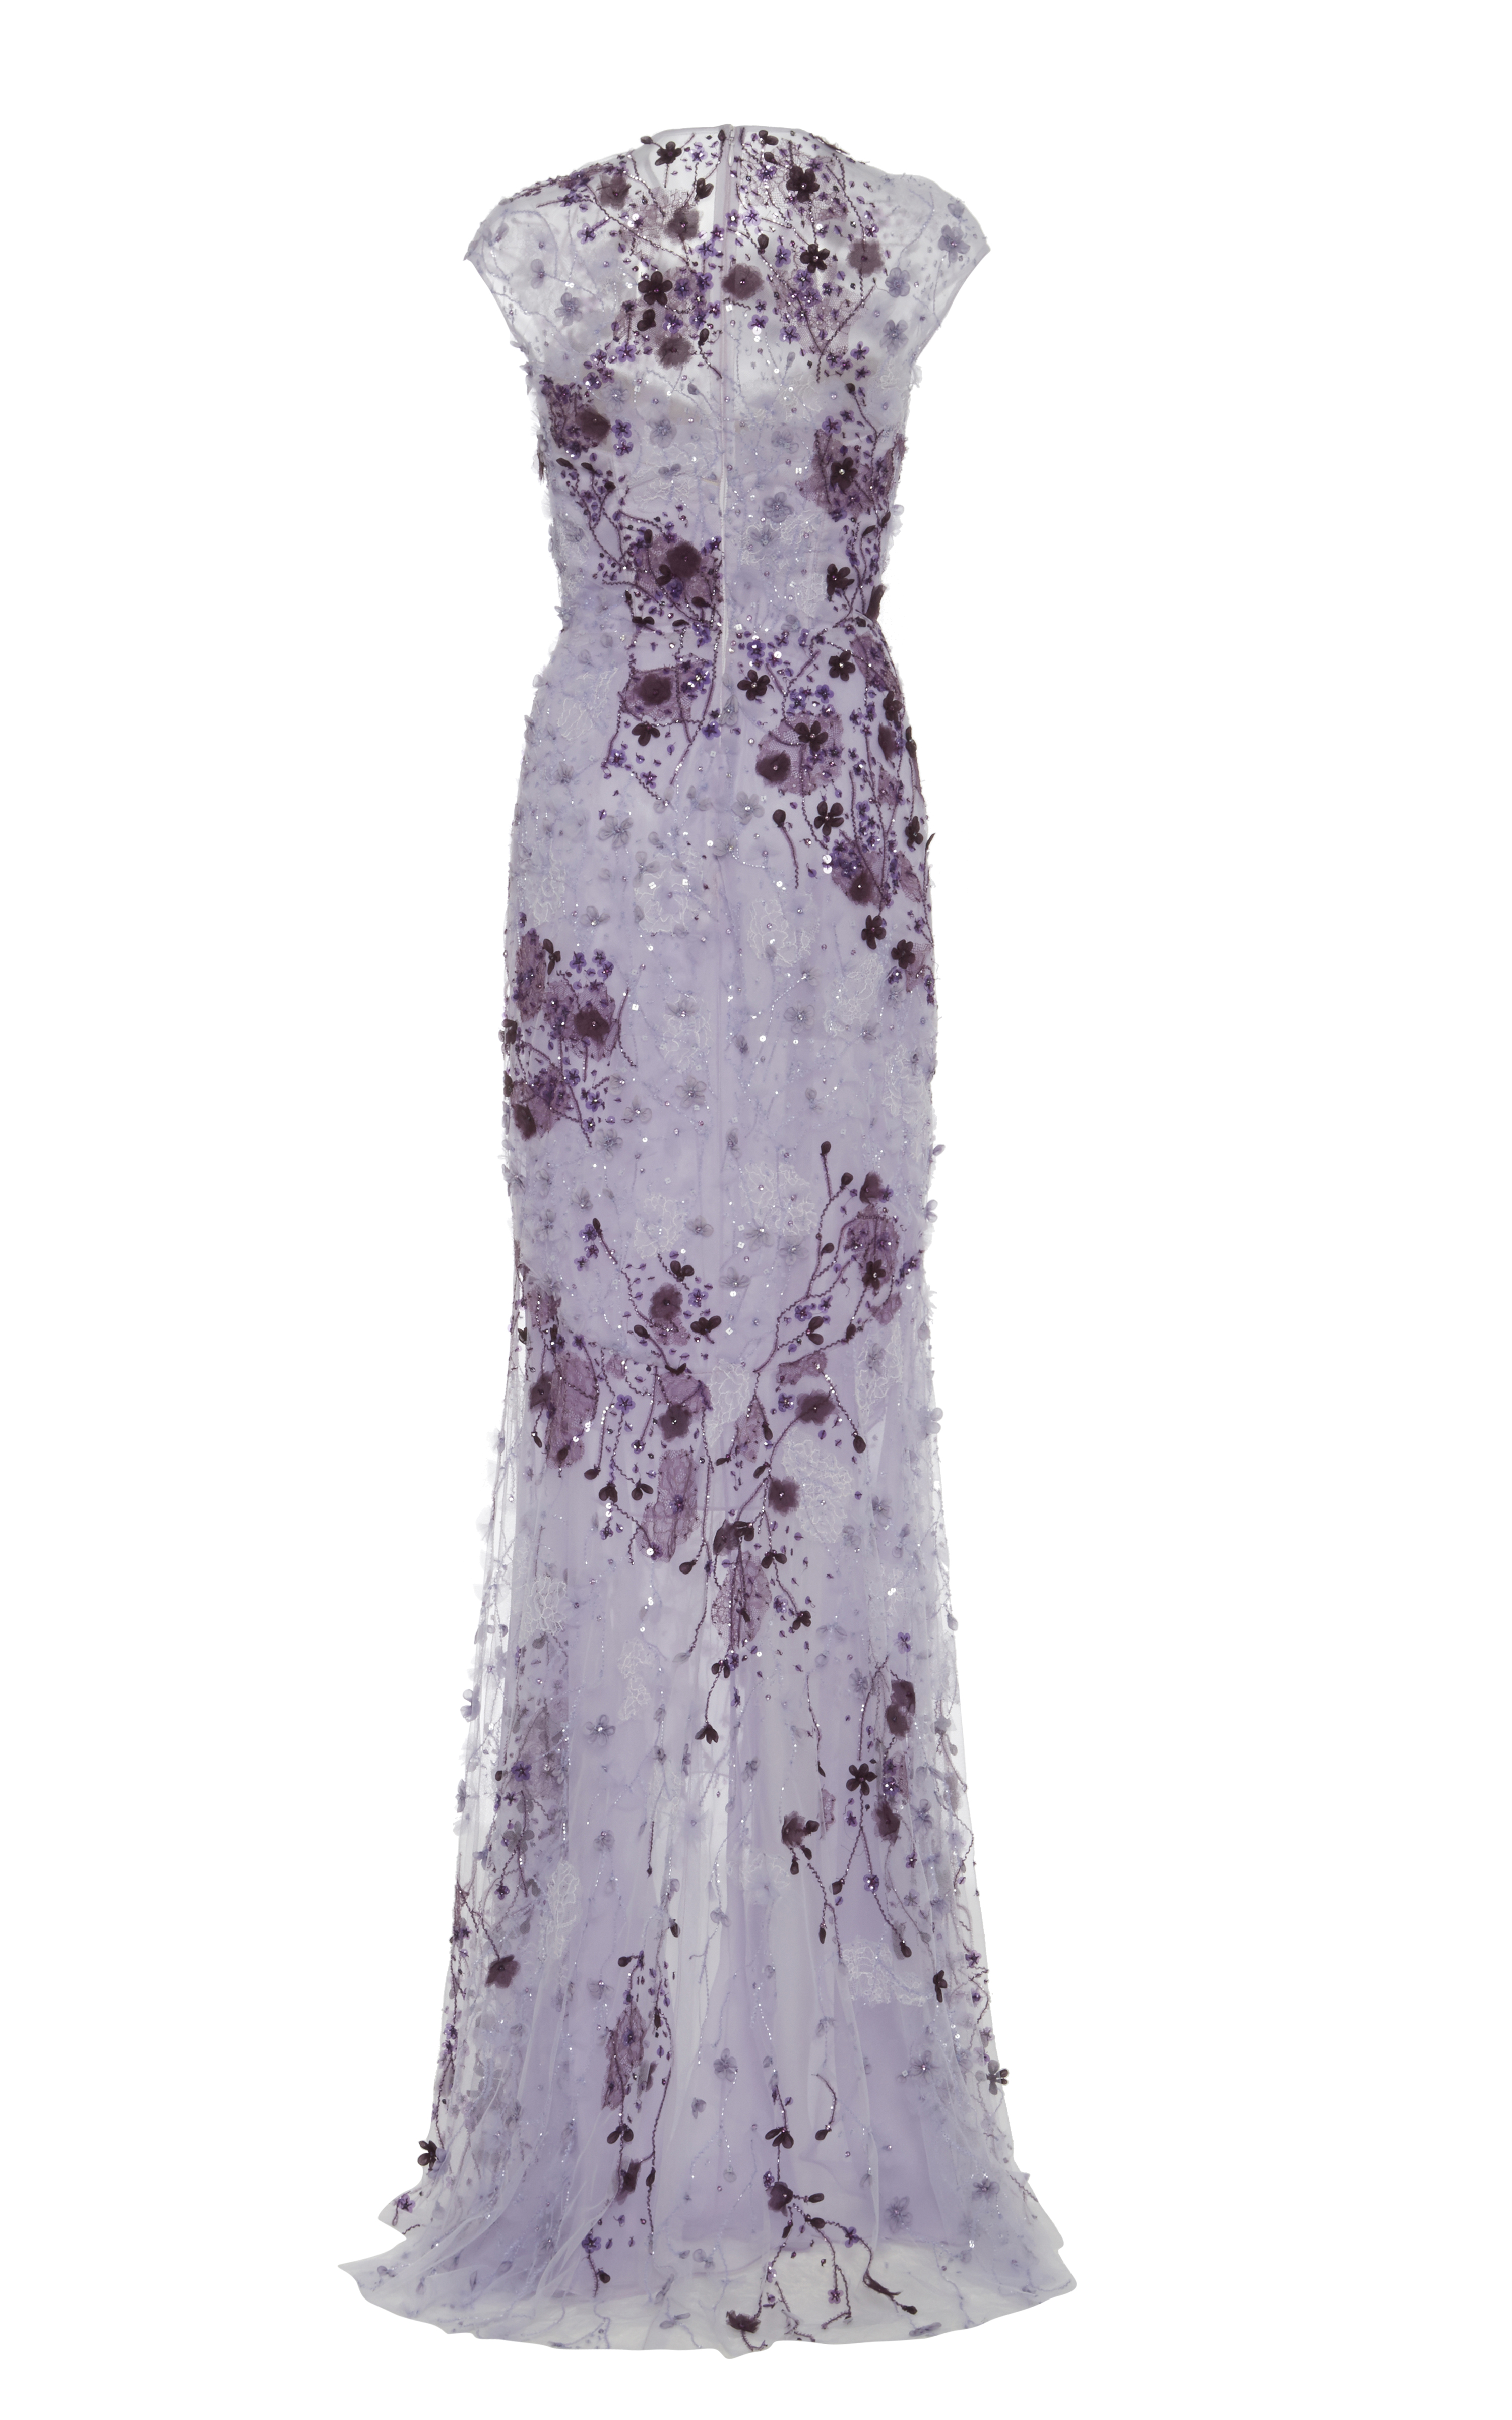 Lyst - Monique Lhuillier Lavender Ombre Lace Embroidered Gown in Purple